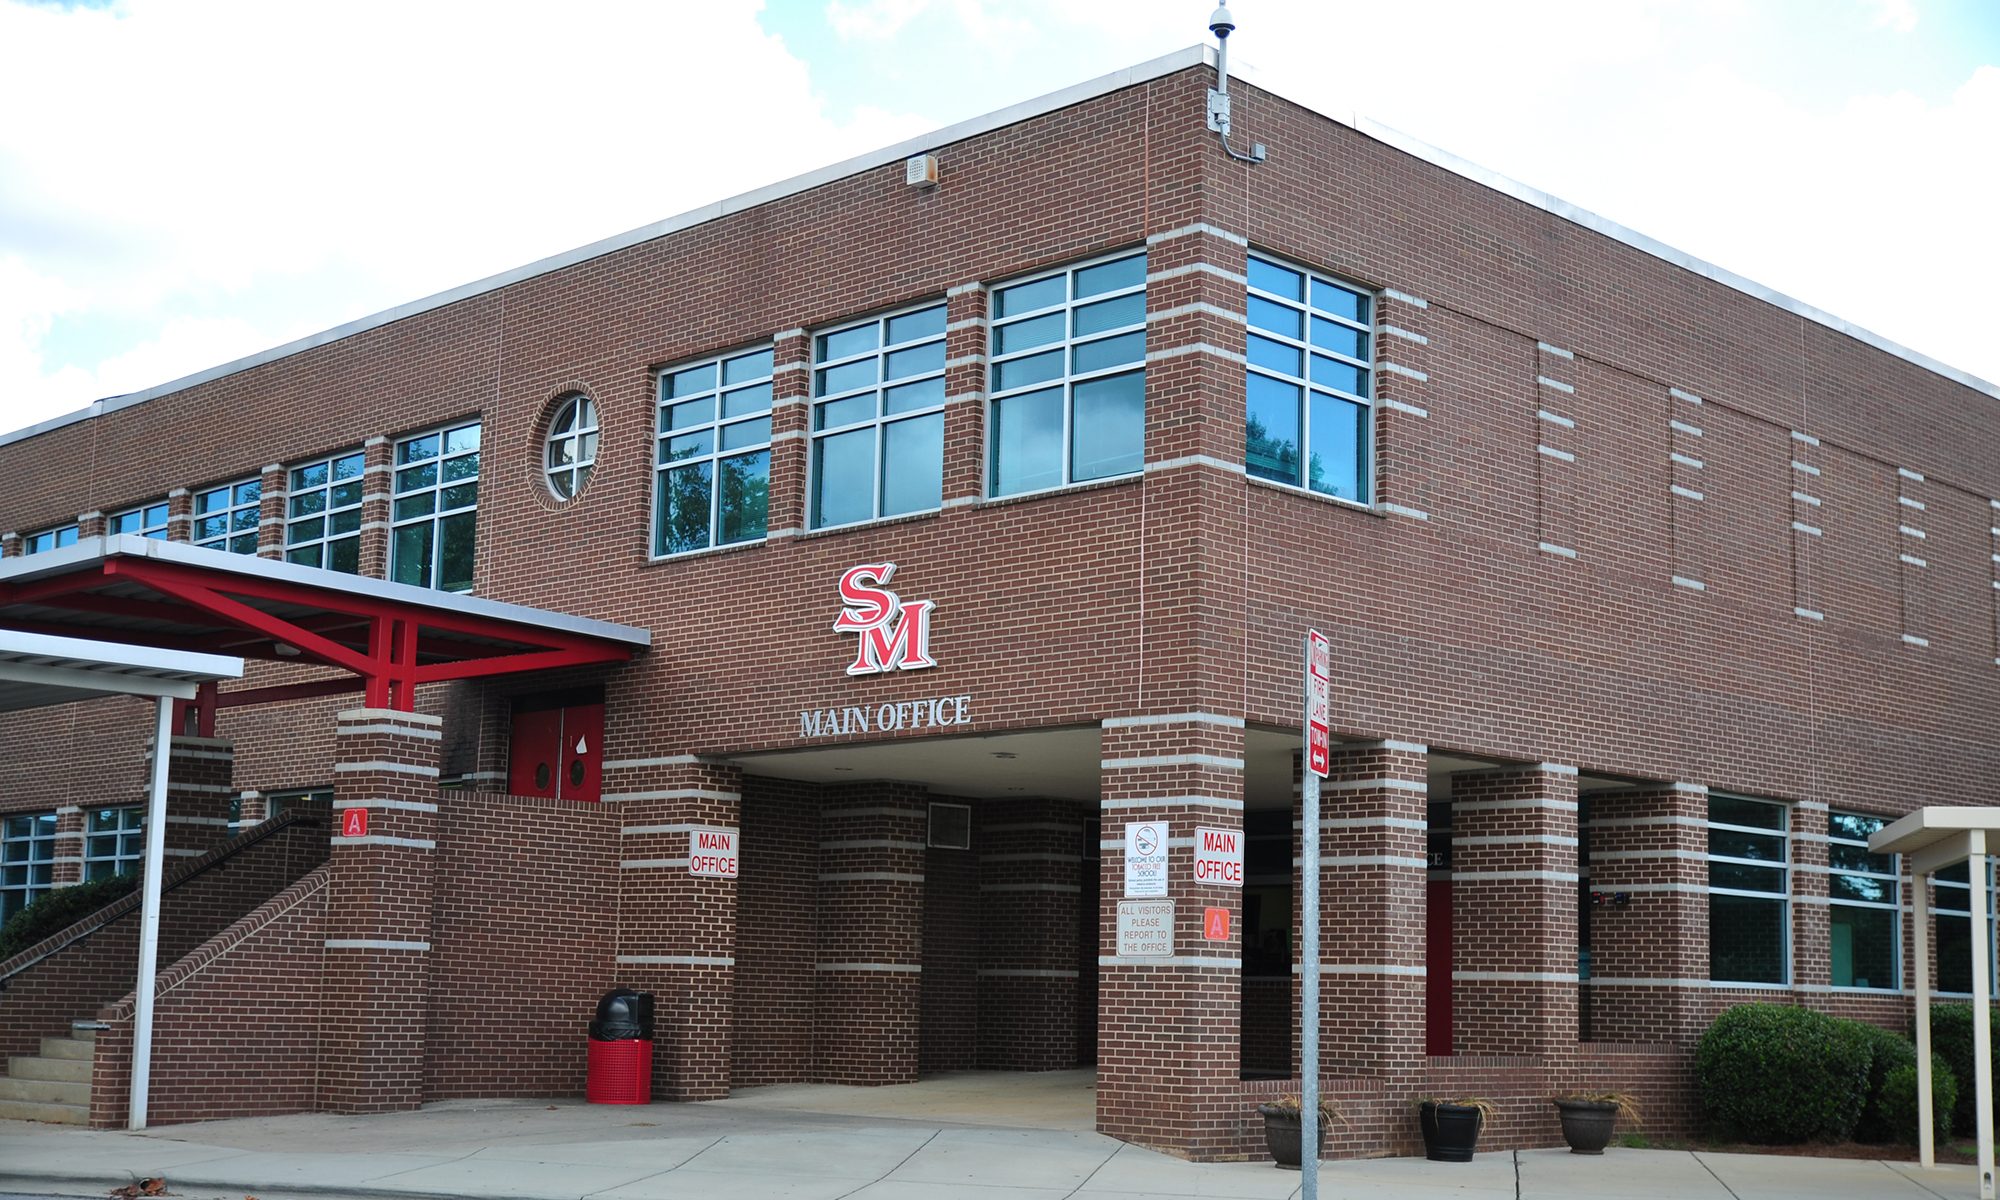 Exterior of South Mecklenburg High School